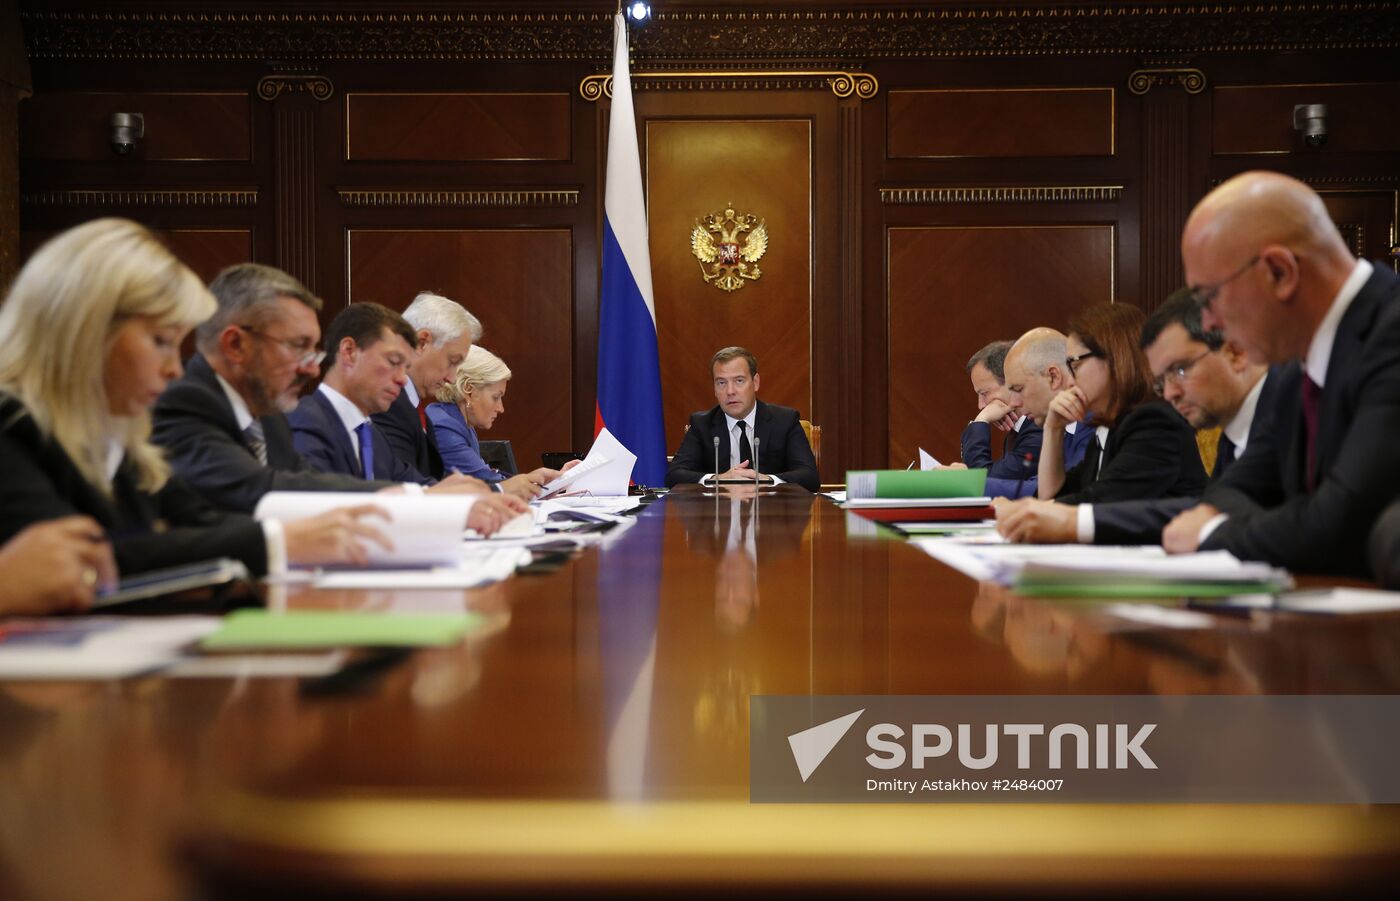 Dmitry Medvedev chairs government meeting in Gorki